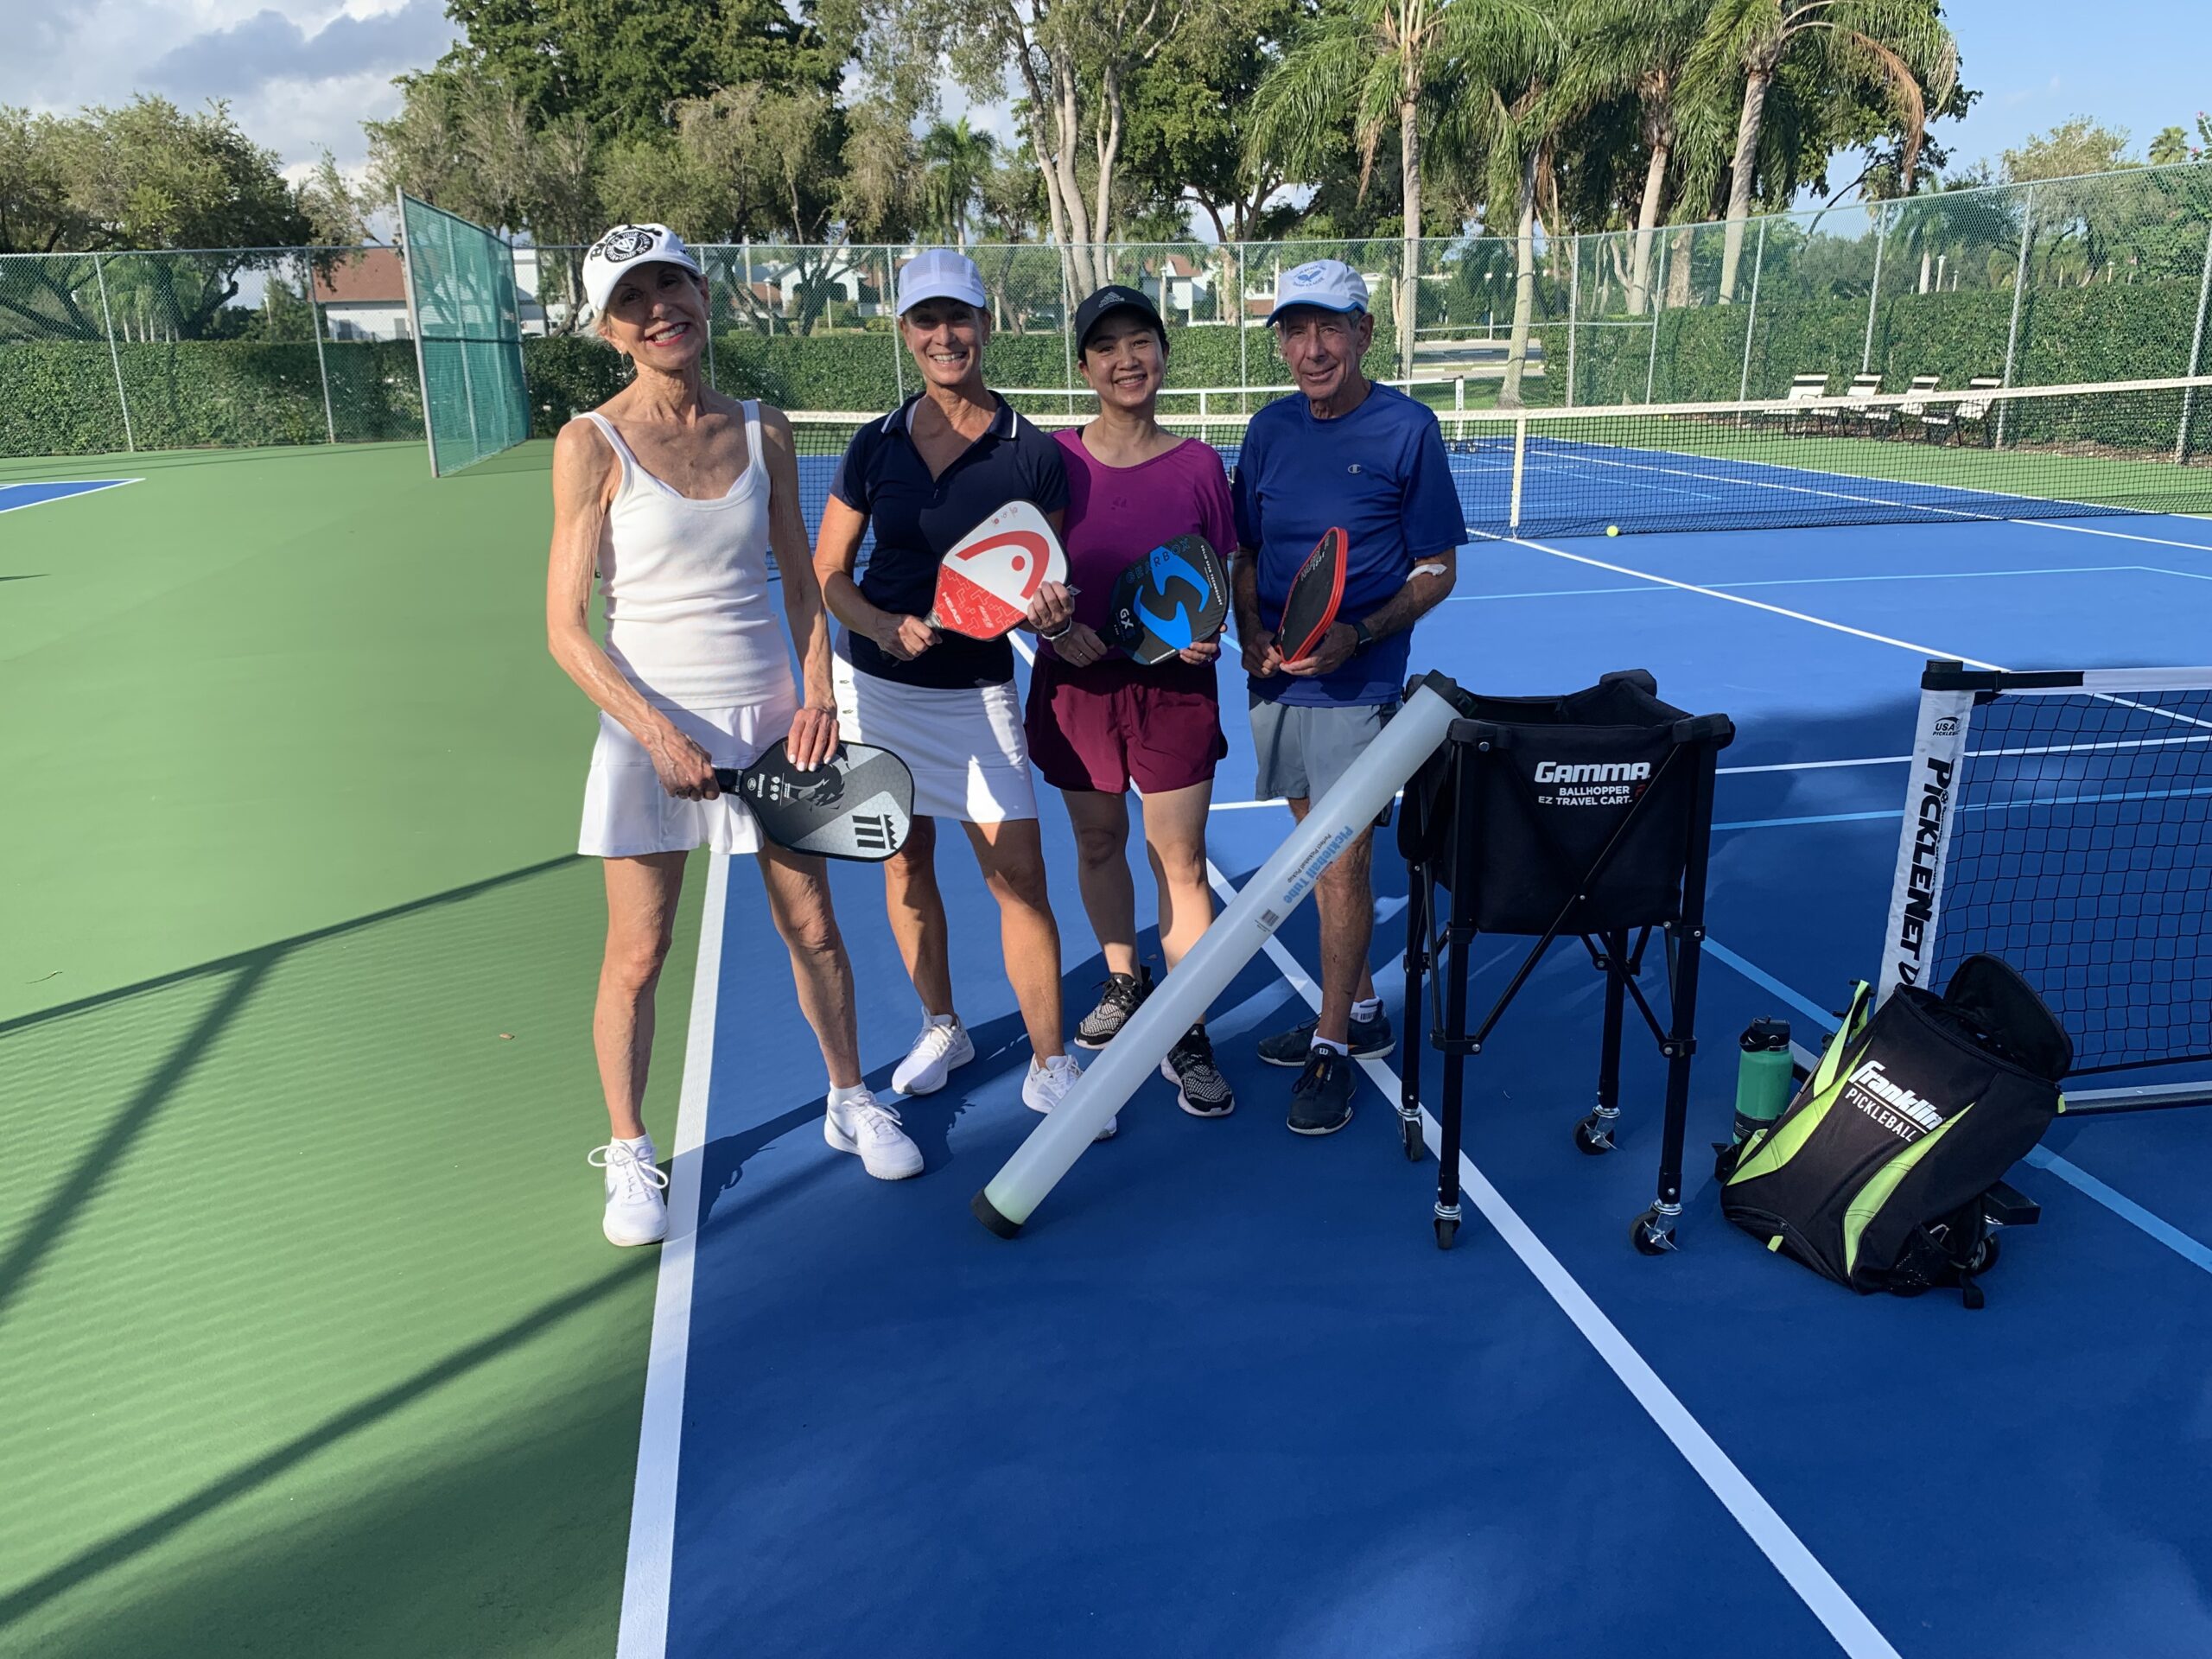 Bob-with-Kathy-Trang-and-Barbara-after-an-Advanced-Beginners-Pickleball-Clinic-in-Delray-Beach